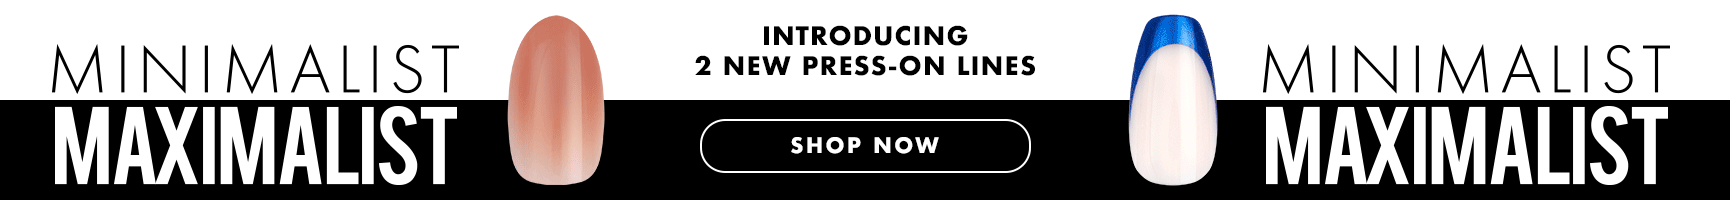 Minimalist maximalist introducing two new press-on lines - SHOP NOW